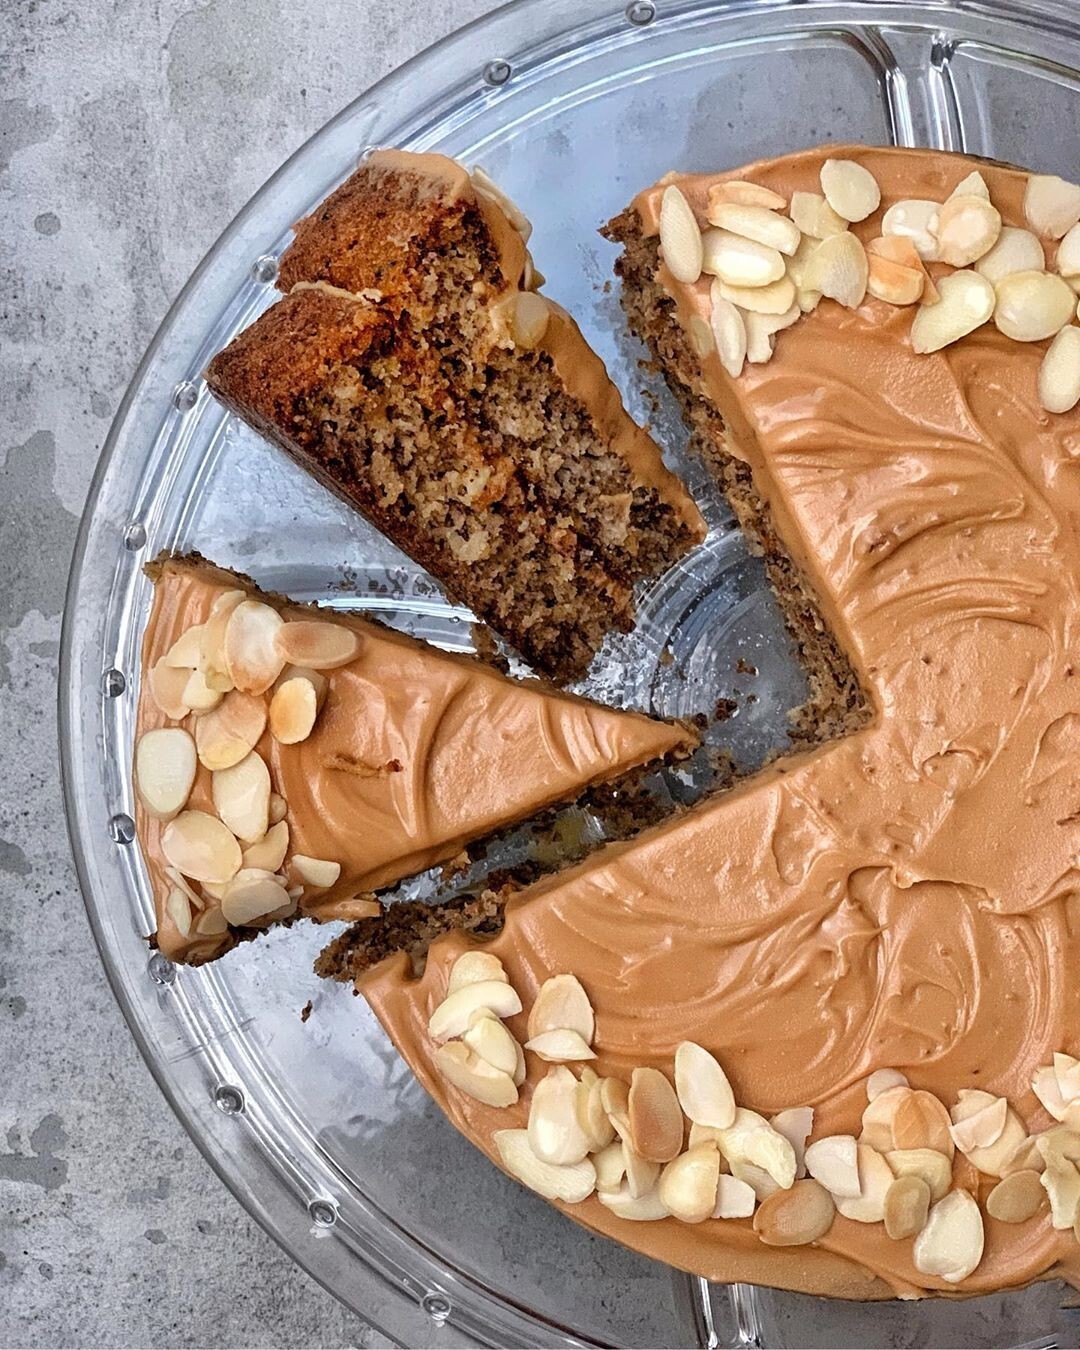 Fittie Sense’s Vegan Hummingbird, a plant-based cake baked with soy flour, polenta and olive oil, with pineapple and bananas for a tantalising tangy flavour. Photo: @my_fittiesense/Instagram